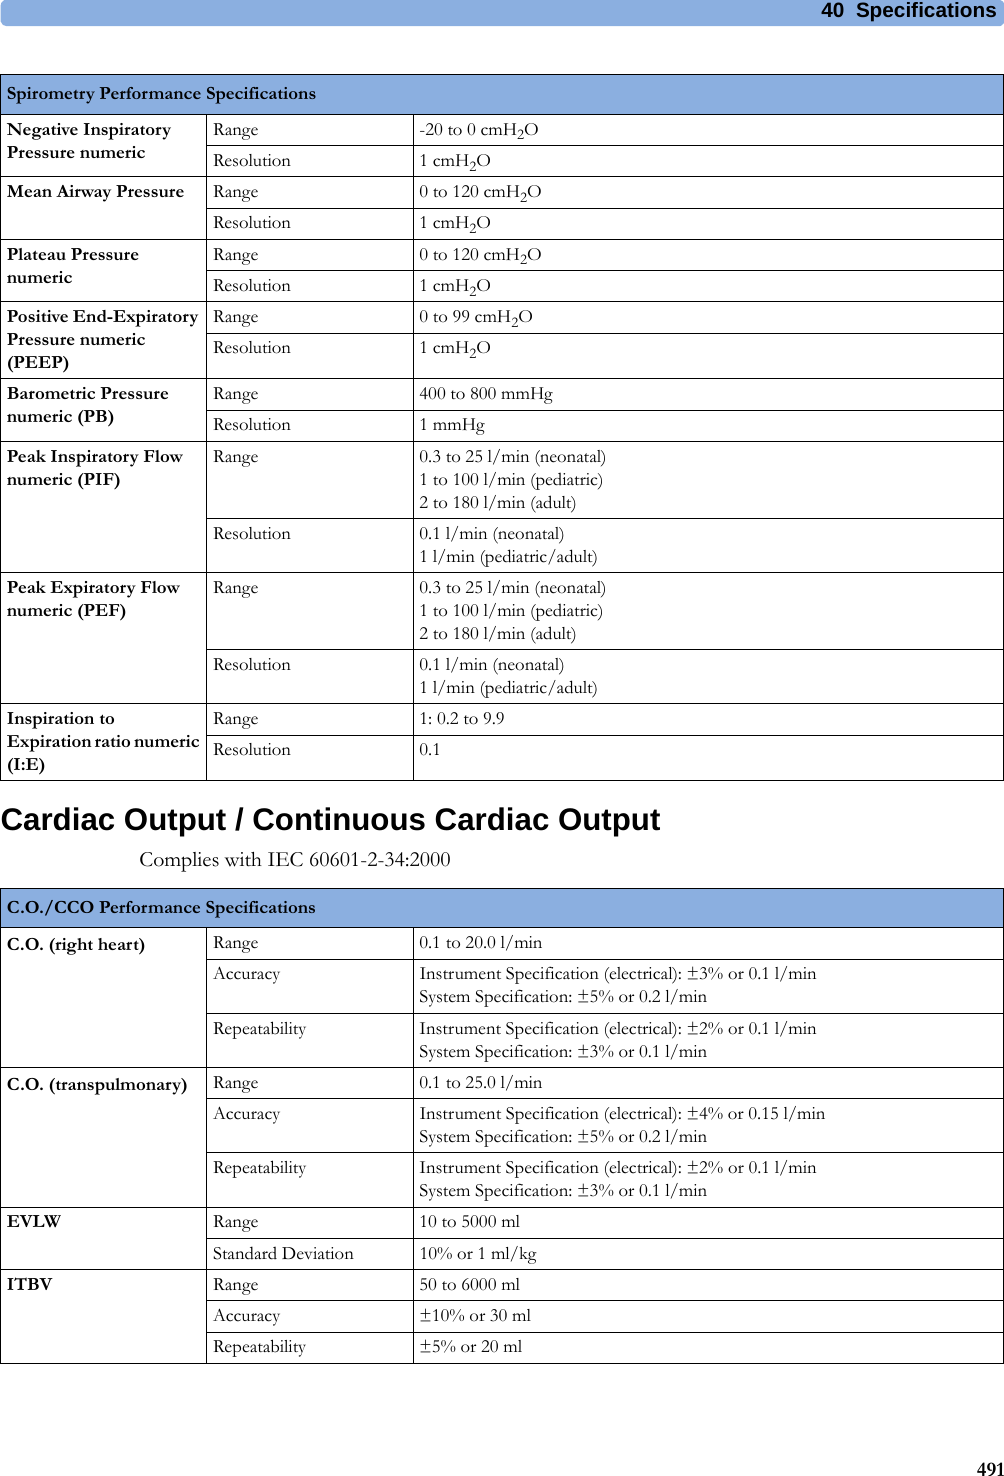 40 Specifications491Cardiac Output / Continuous Cardiac OutputComplies with IEC 60601-2-34:2000Negative Inspiratory Pressure numericRange -20 to 0 cmH2OResolution 1 cmH2OMean Airway Pressure Range 0 to 120 cmH2OResolution 1 cmH2OPlateau Pressure numericRange 0 to 120 cmH2OResolution 1 cmH2OPositive End-Expiratory Pressure numeric (PEEP)Range 0 to 99 cmH2OResolution 1 cmH2OBarometric Pressure numeric (PB)Range 400 to 800 mmHgResolution 1 mmHgPeak Inspiratory Flow numeric (PIF)Range 0.3 to 25 l/min (neonatal)1 to 100 l/min (pediatric)2 to 180 l/min (adult)Resolution 0.1 l/min (neonatal)1 l/min (pediatric/adult)Peak Expiratory Flow numeric (PEF)Range 0.3 to 25 l/min (neonatal)1 to 100 l/min (pediatric)2 to 180 l/min (adult)Resolution 0.1 l/min (neonatal)1 l/min (pediatric/adult)Inspiration to Expiration ratio numeric (I:E)Range 1: 0.2 to 9.9Resolution 0.1Spirometry Performance SpecificationsC.O./CCO Performance SpecificationsC.O. (right heart) Range 0.1 to 20.0 l/minAccuracy Instrument Specification (electrical): ±3% or 0.1 l/minSystem Specification: ±5% or 0.2 l/minRepeatability Instrument Specification (electrical): ±2% or 0.1 l/minSystem Specification: ±3% or 0.1 l/minC.O. (transpulmonary) Range 0.1 to 25.0 l/minAccuracy Instrument Specification (electrical): ±4% or 0.15 l/minSystem Specification: ±5% or 0.2 l/minRepeatability Instrument Specification (electrical): ±2% or 0.1 l/minSystem Specification: ±3% or 0.1 l/minEVLW Range 10 to 5000 mlStandard Deviation 10% or 1 ml/kgITBV Range 50 to 6000 mlAccuracy ±10% or 30 mlRepeatability ±5% or 20 ml